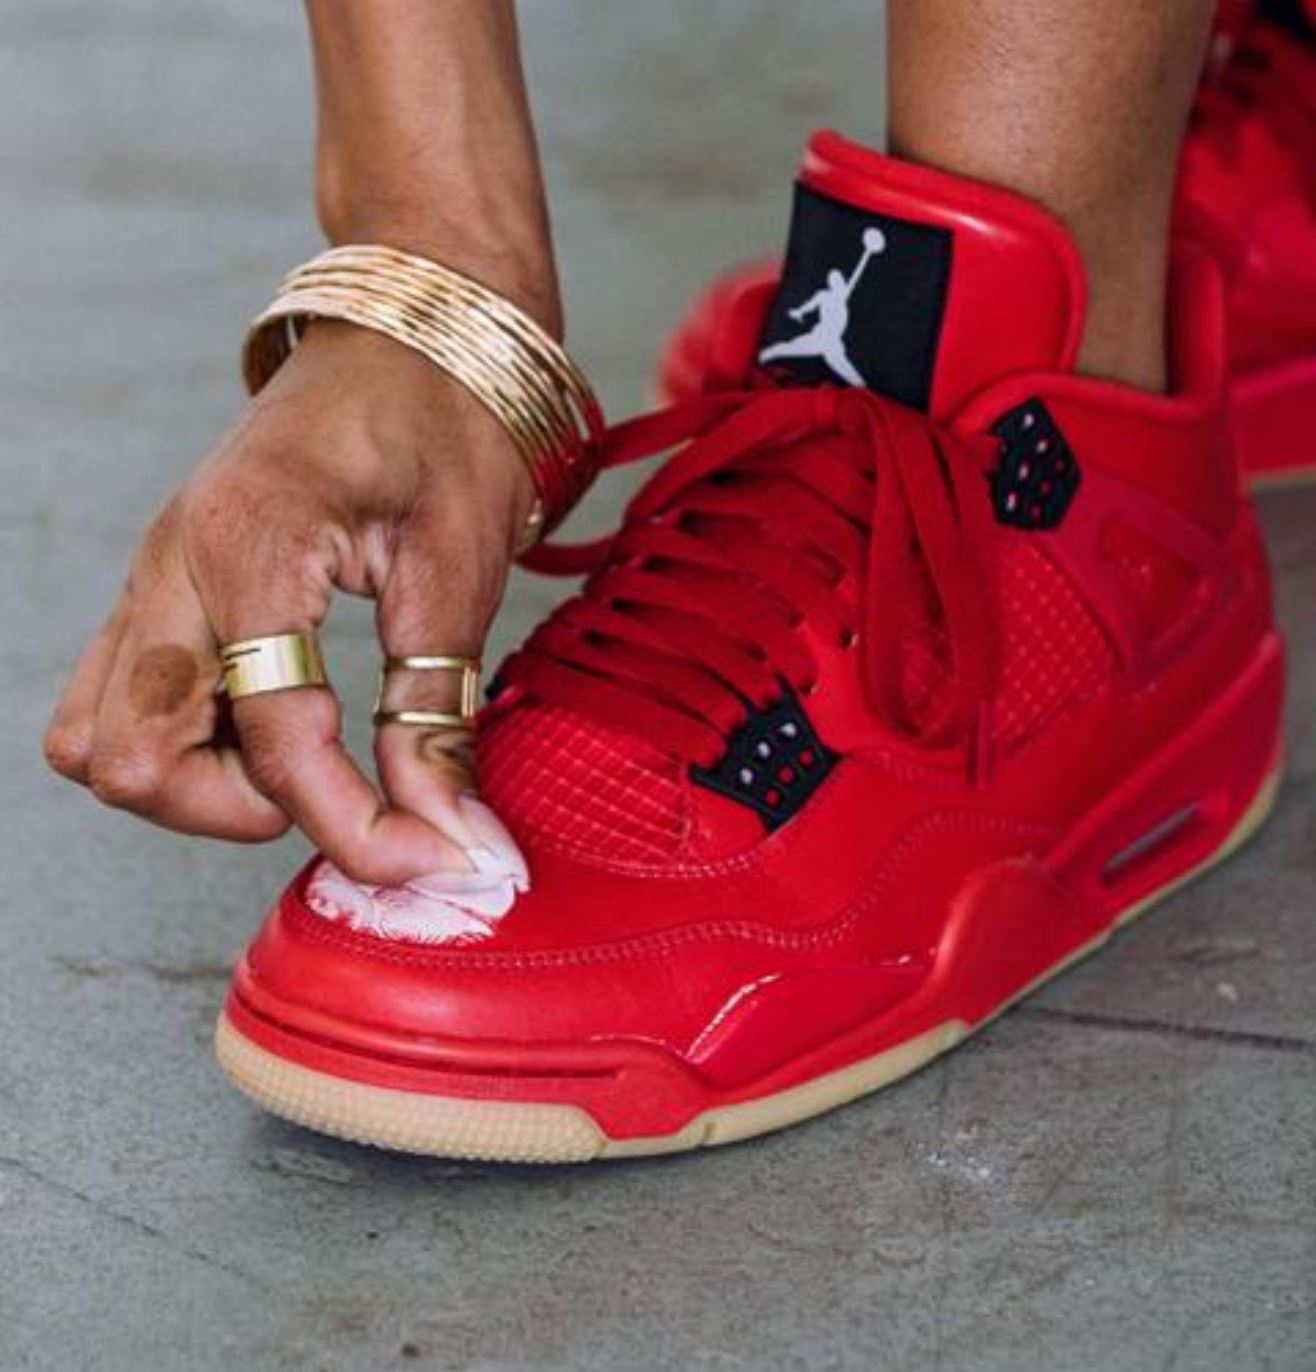 The Women's Air Jordan 4 'Fire Red' Releases on Single's Day, the 